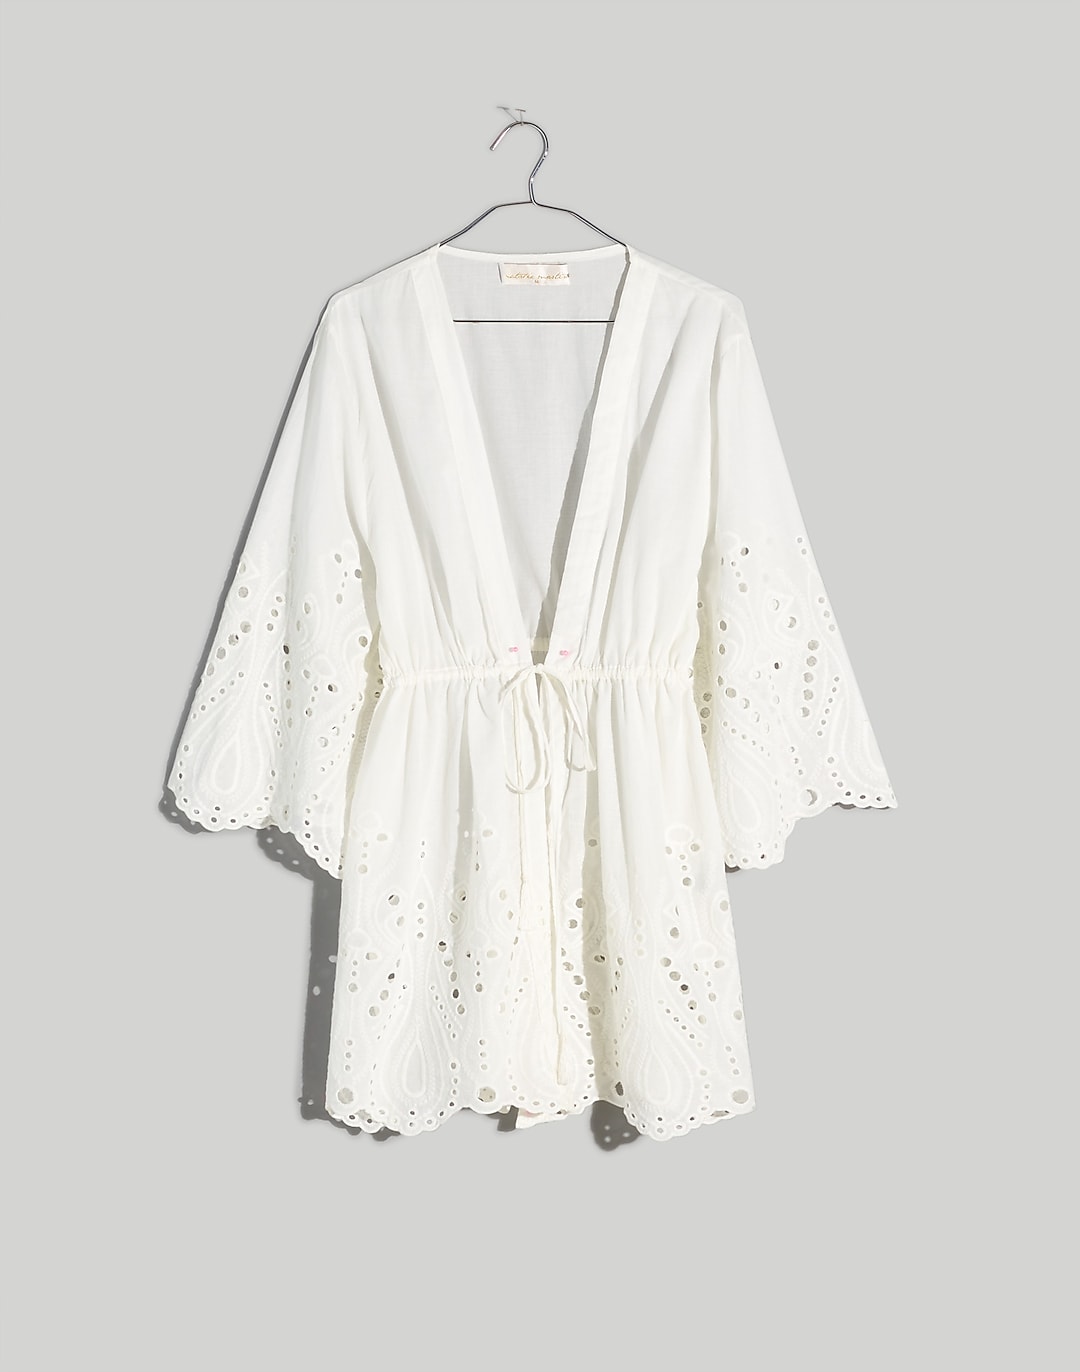 Natalie Martin Embroidered Ivy Cover-Up Wrap Dress | Madewell